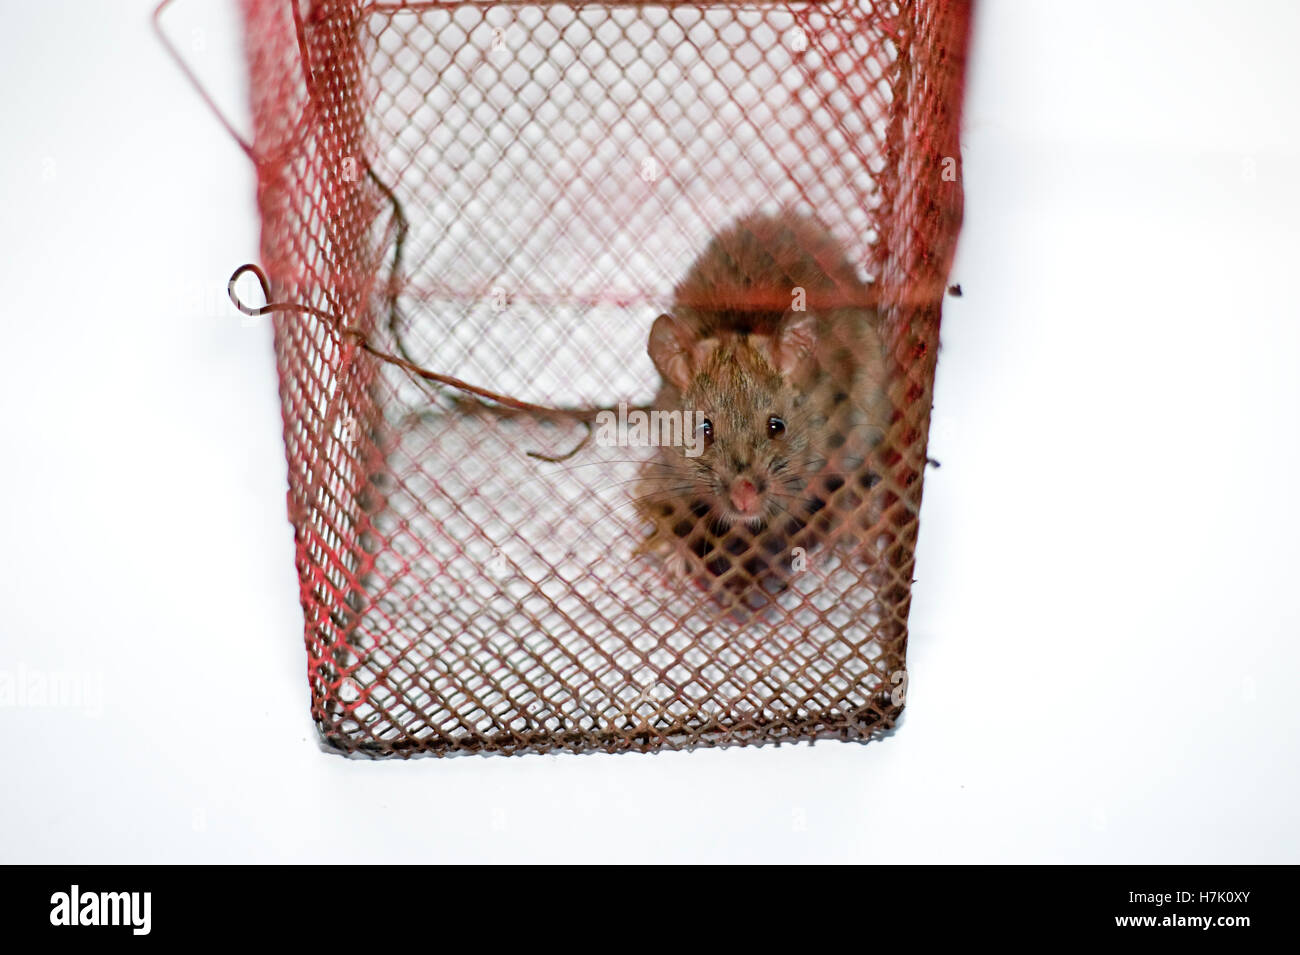 https://c8.alamy.com/comp/H7K0XY/house-rat-trapped-in-a-cage-in-white-background-mumbai-maharashtra-H7K0XY.jpg